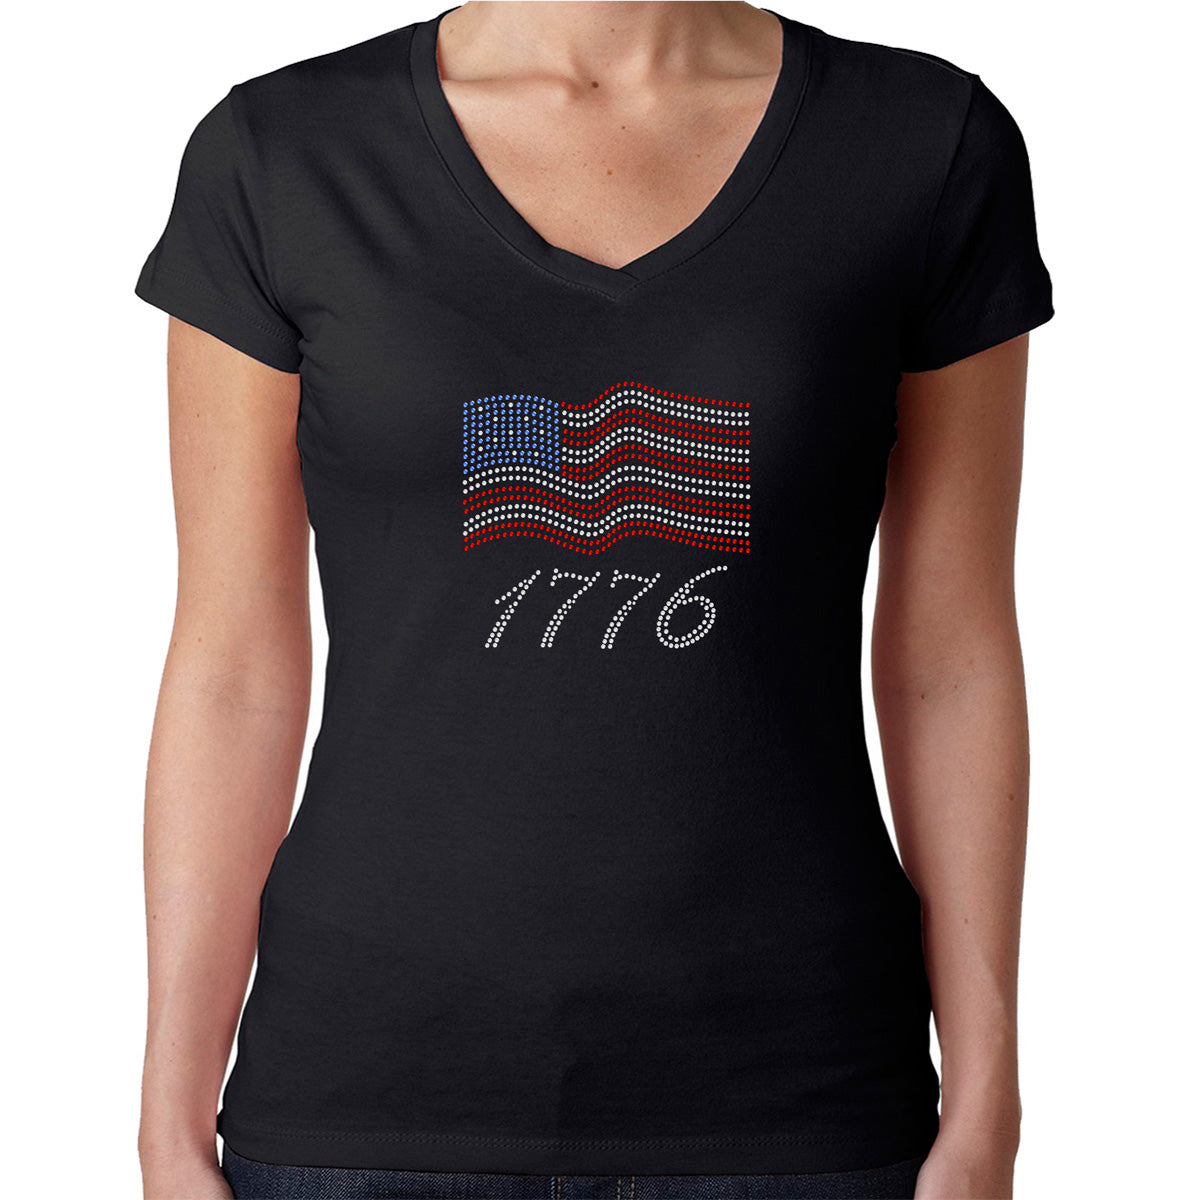 Womens T-Shirt Rhinestone Bling Black Fitted Tee USA Flag 4th of July 1776